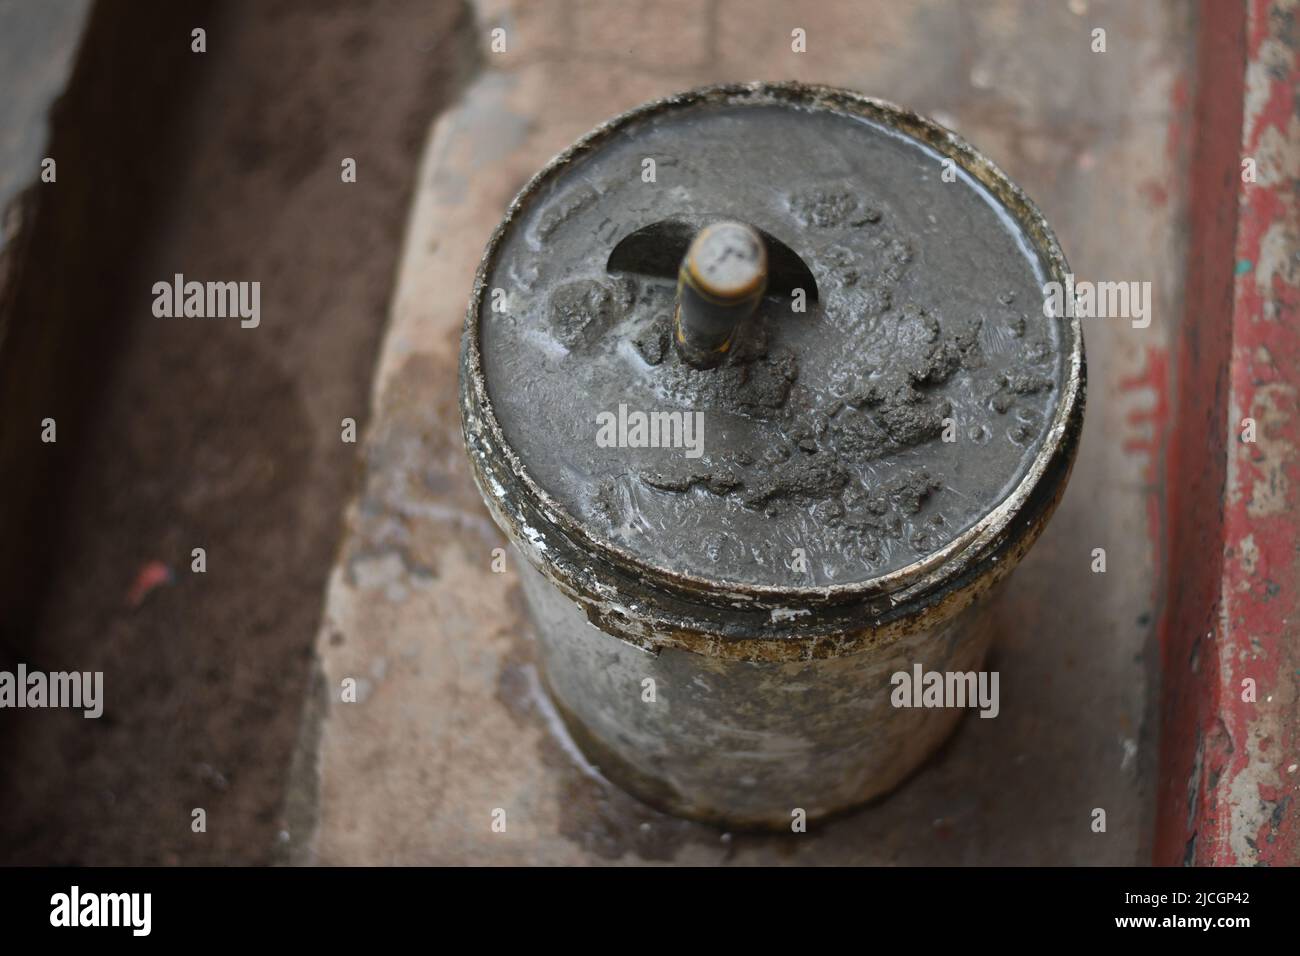 Mixed concrete Plaster on a bucket. There's a mason spoon in it. Stock Photo